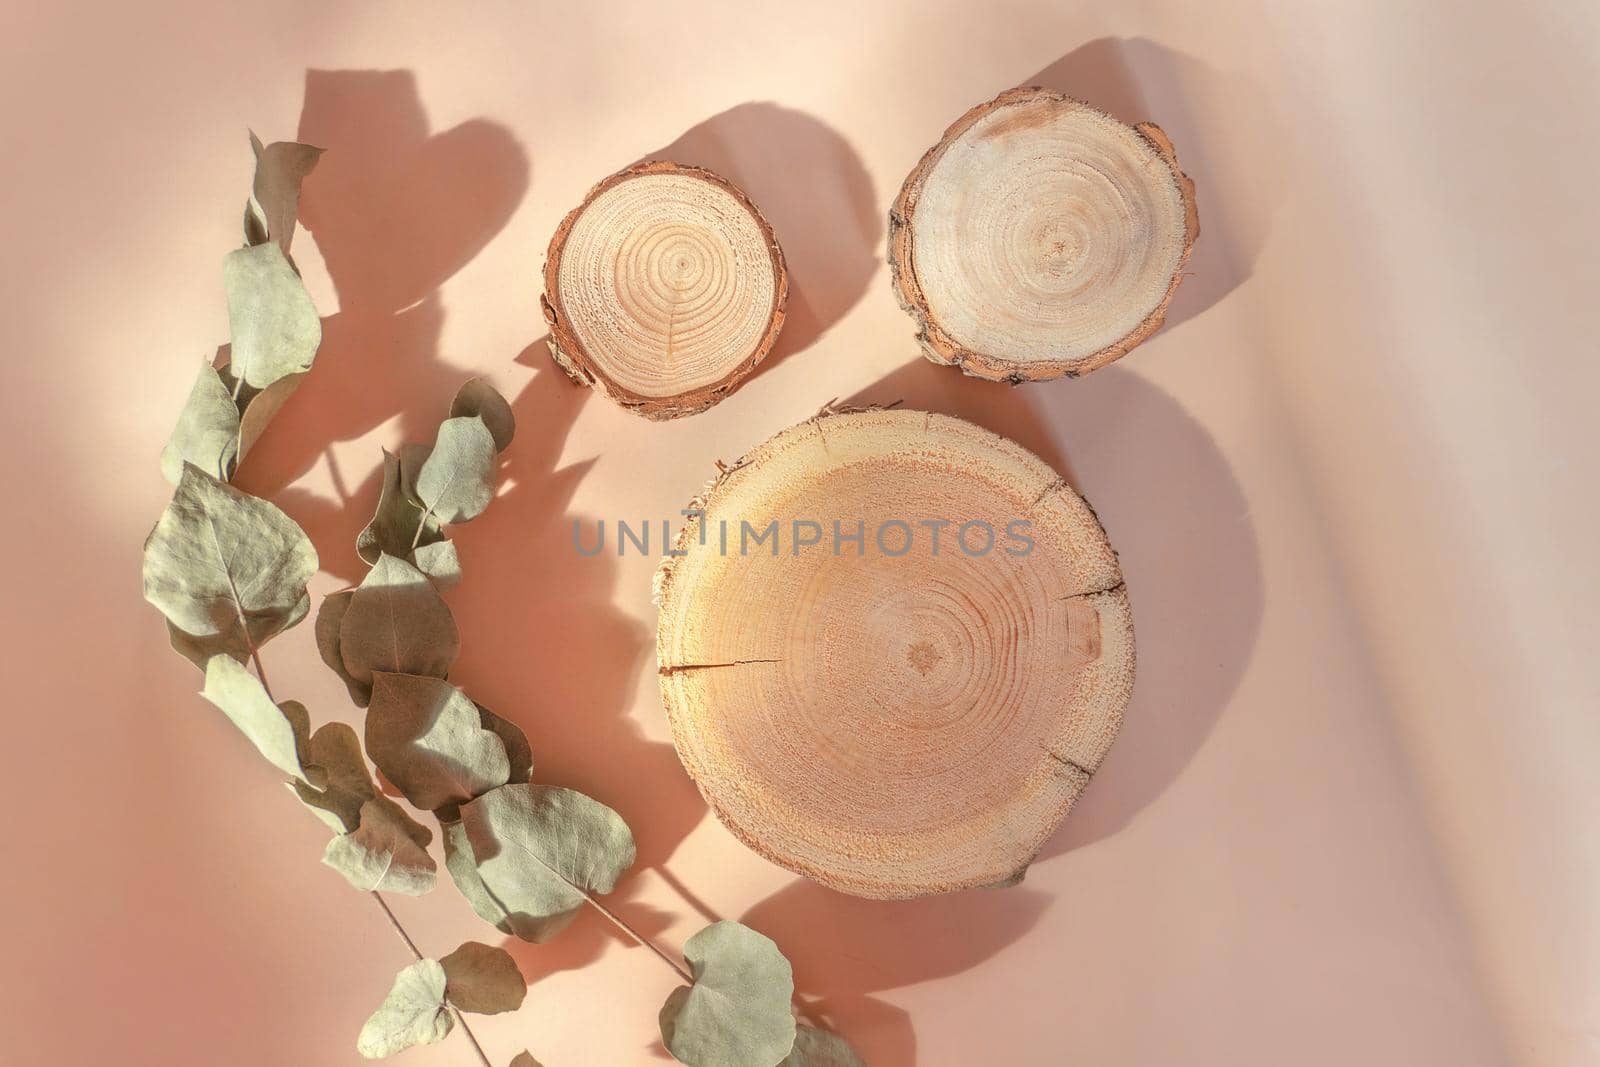 Three wooden podiums for cosmetics or products on beige background with nice shadows and dry eucalyptus. Flat lay, top view. Natural and minimalistic perfume, body or healthcare presentation concept